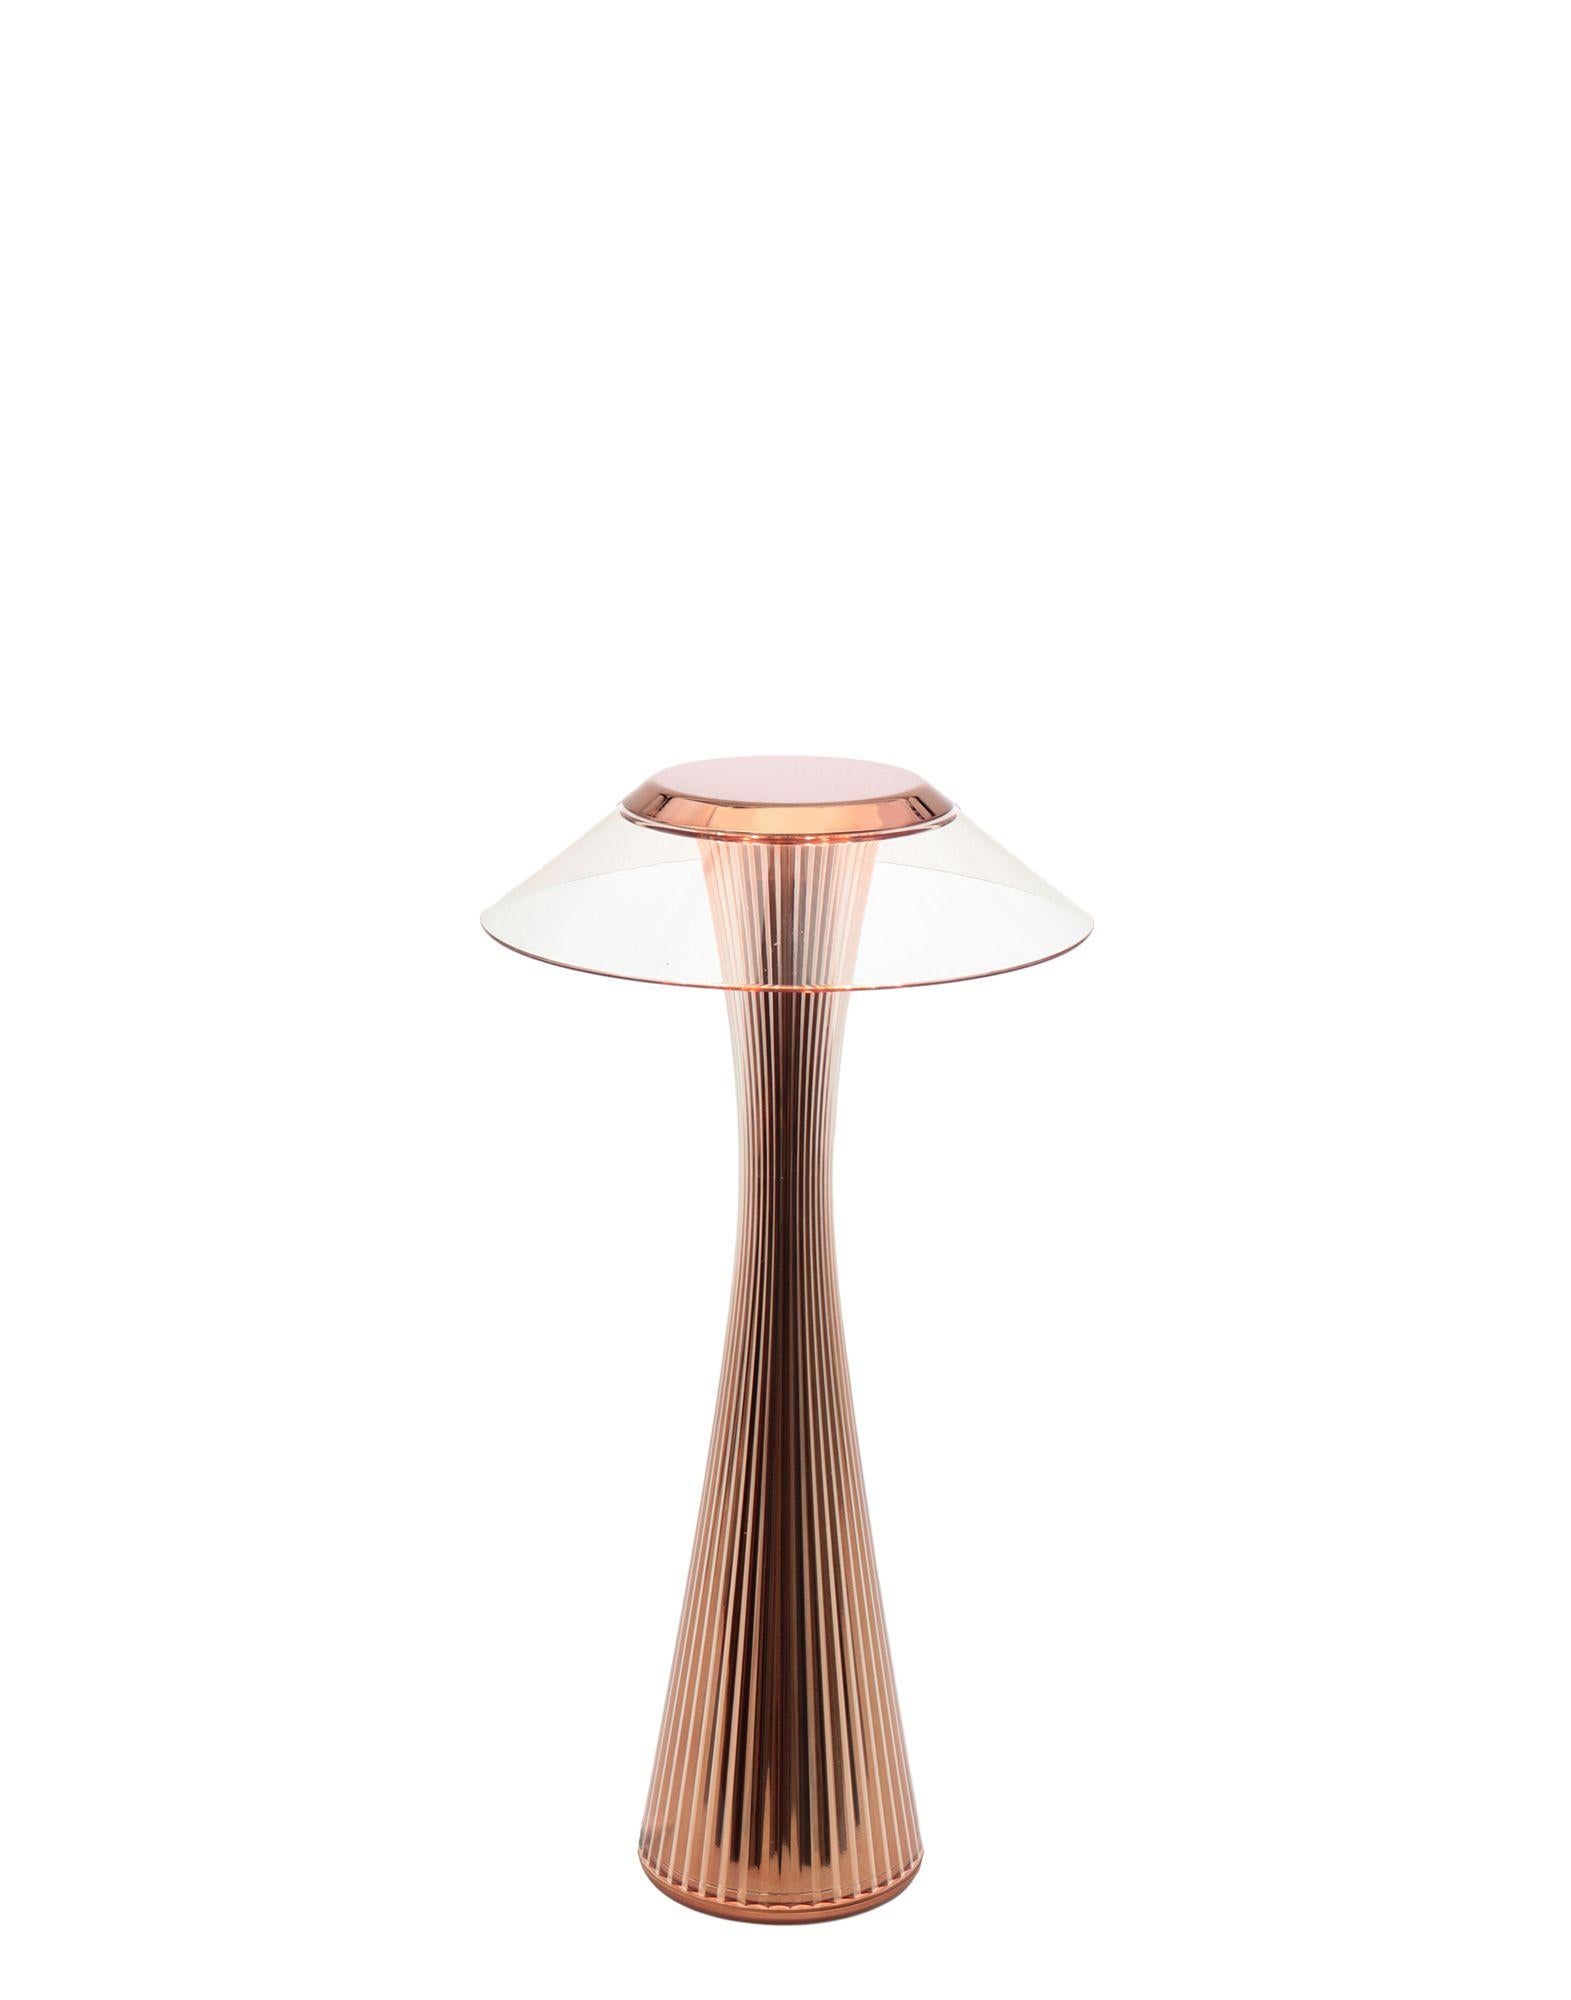 A table lamp made of transparent plastic with an elongated shape: the silhouette recalls the shapes of the Space Needle, the tower that made the Seattle skyline famous. “In designing the ‘Space’ Lamp, we drew inspiration from the futuristic spirit